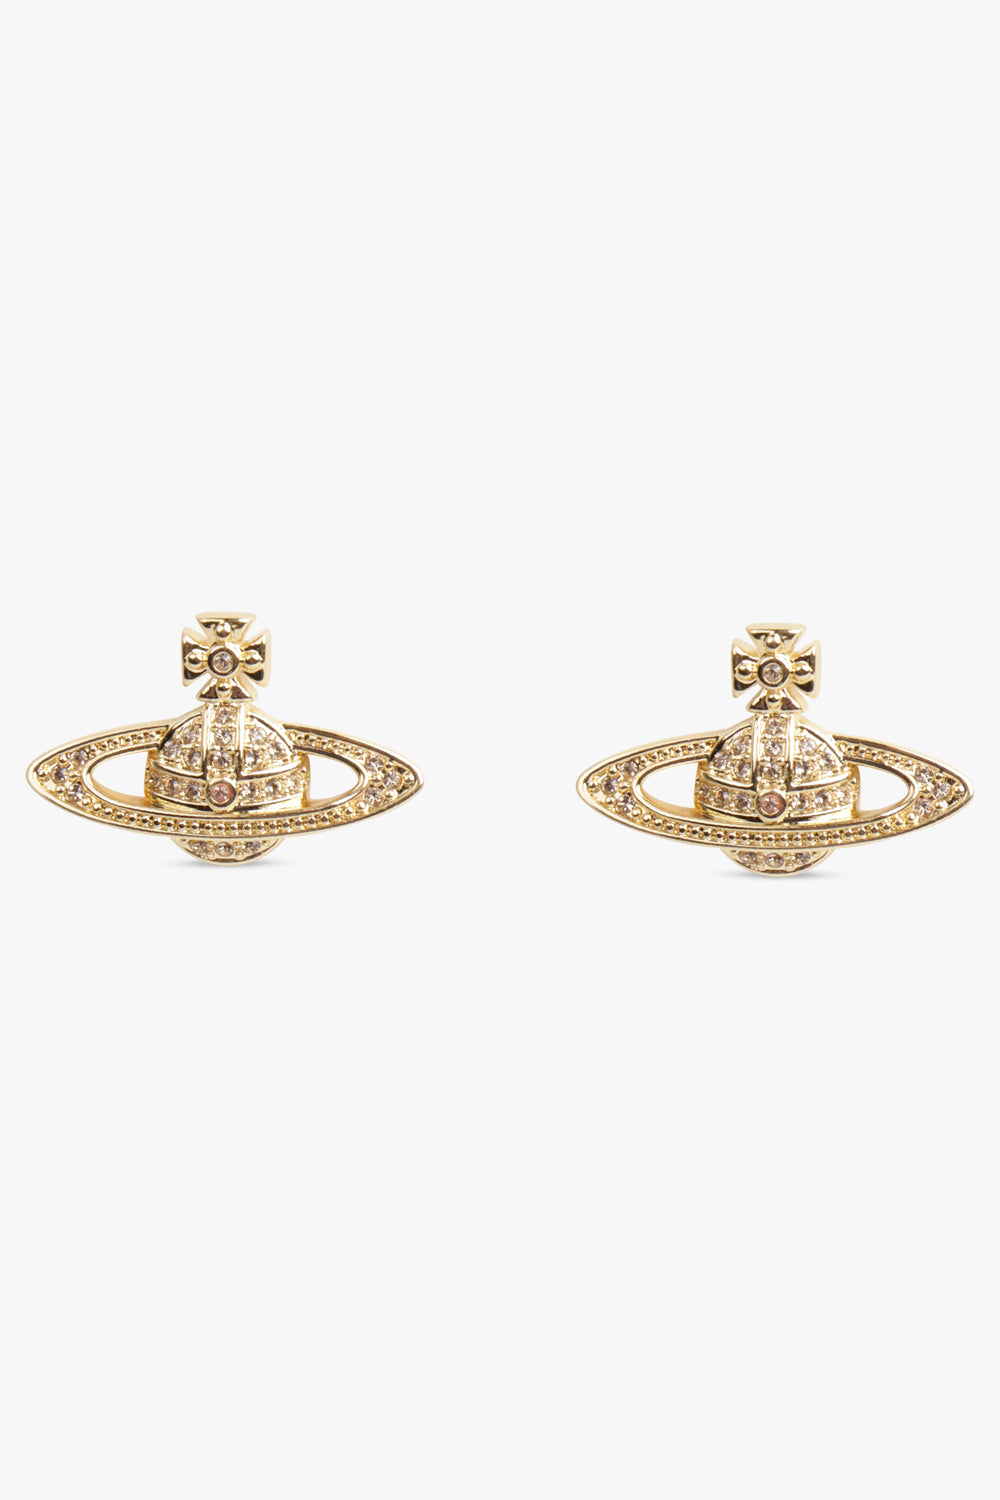 VIVIENNE WESTWOOD JEWELLRY GOLD / GOLD MINI BAS RELIEF EARRINGS | GOLD